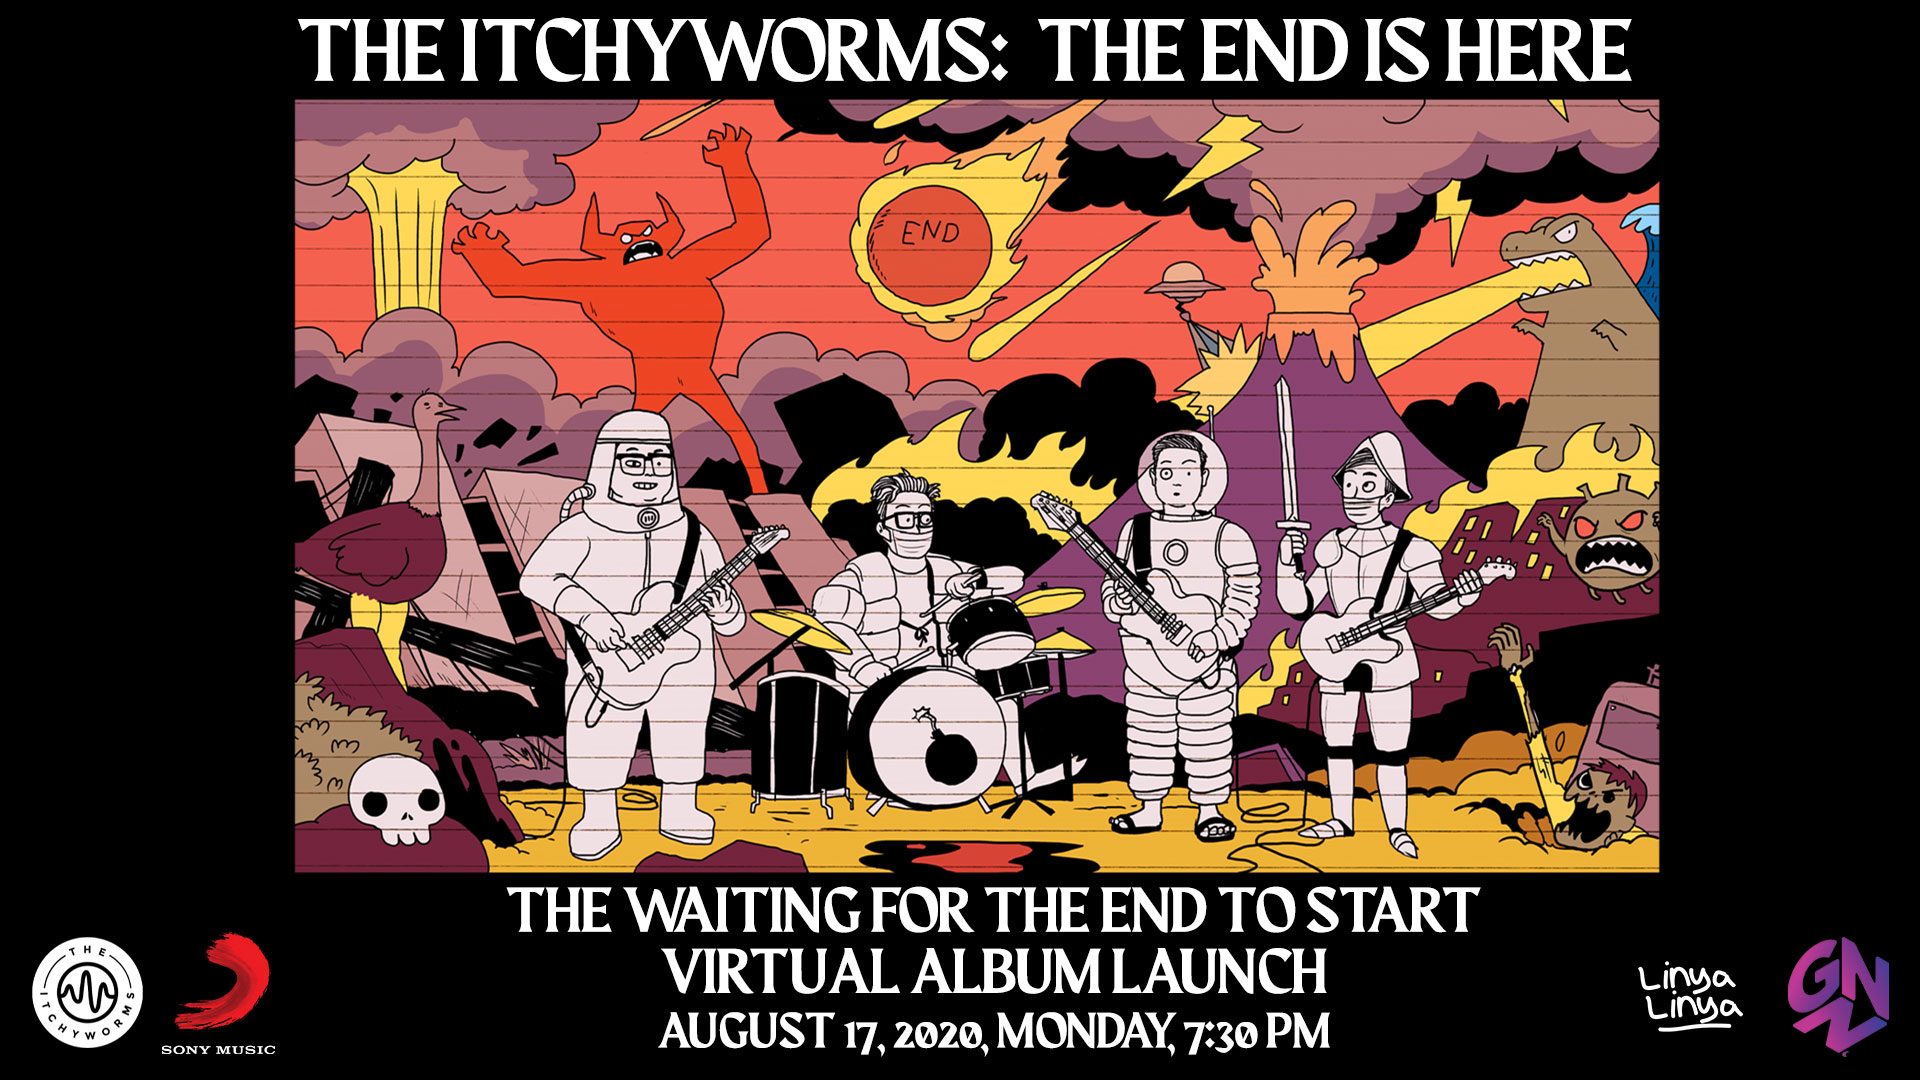 The Itchyworms launching  new album with online listening party on August 17